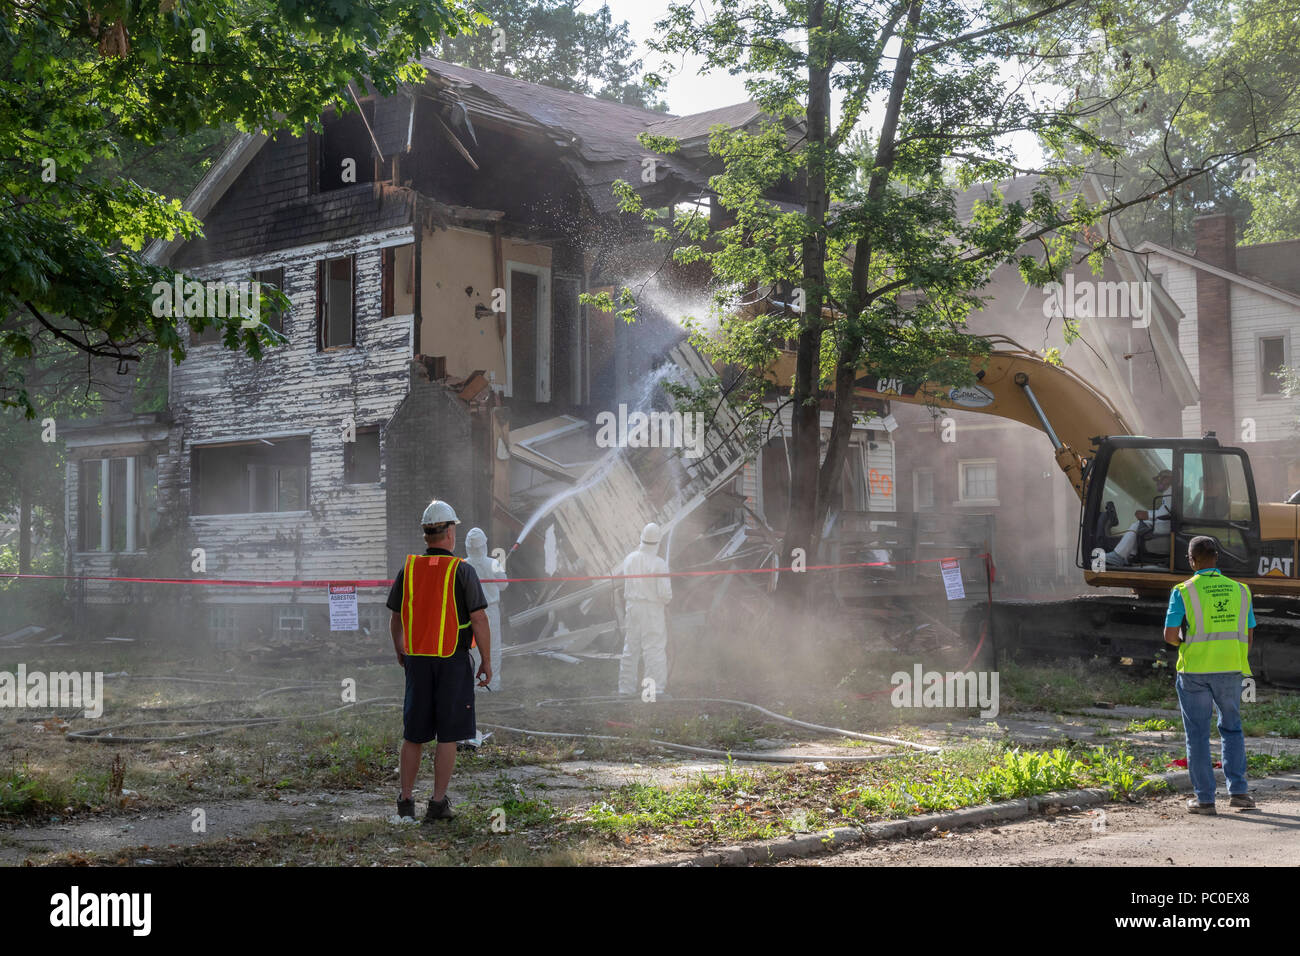 Detroit, Michigan - Dust envelops a worksite as workers, using protective clothing to guard against asbestos exposure, demolish an abandoned house. A  Stock Photo